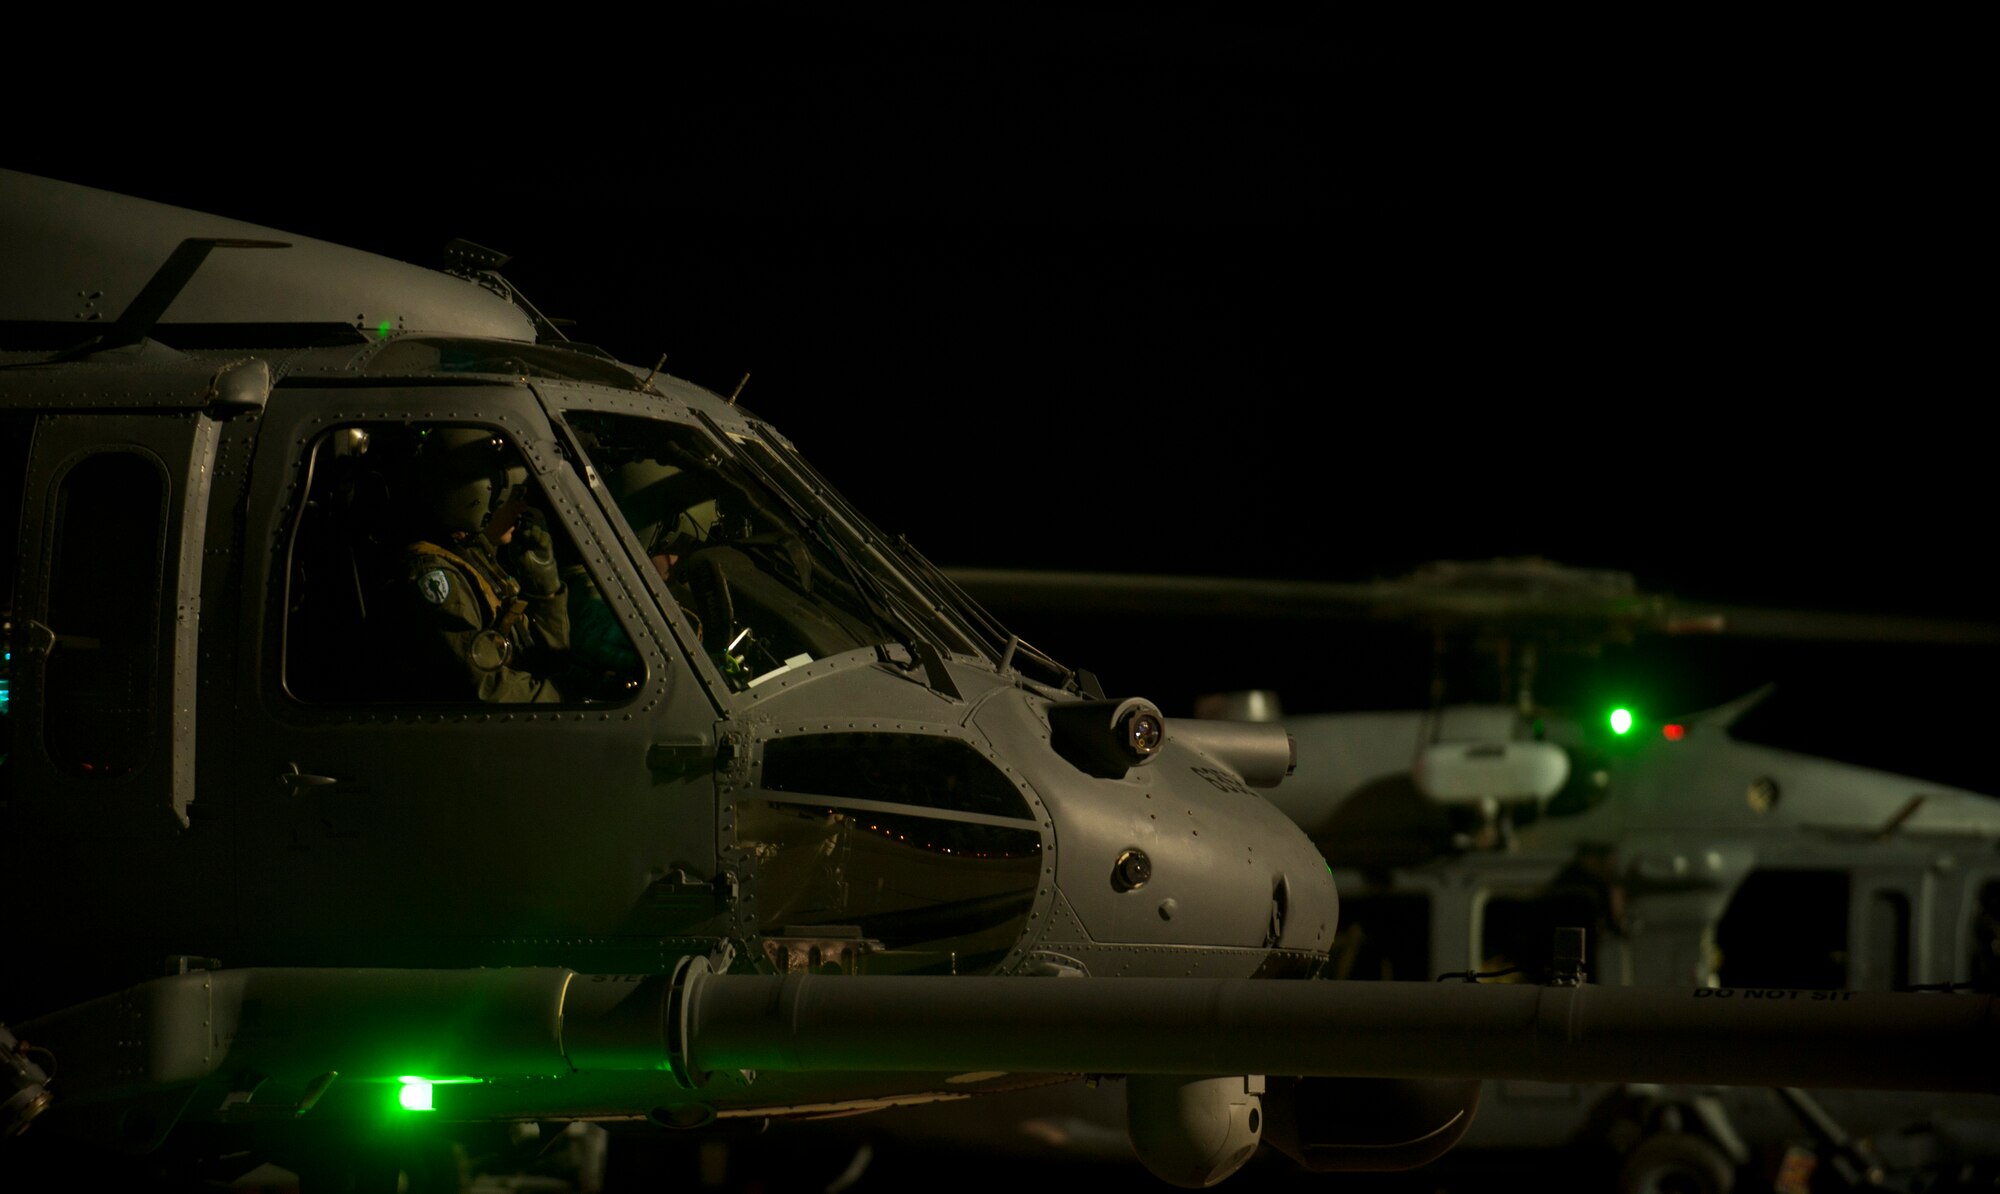 A pair of HH-60G Pave Hawks assigned to the 66th Rescue Squadron prepare for takeoff prior to executing a Red Flag 15-1 personnel recovery training mission at Nellis Air Force Base, Nev., Feb. 5, 2015. A low-light environment and mountainous terrain make training scenarios a challenging test of aircrew proficiency.  (U.S. Air Force photo by Airman 1st Class Joshua Kleinholz)